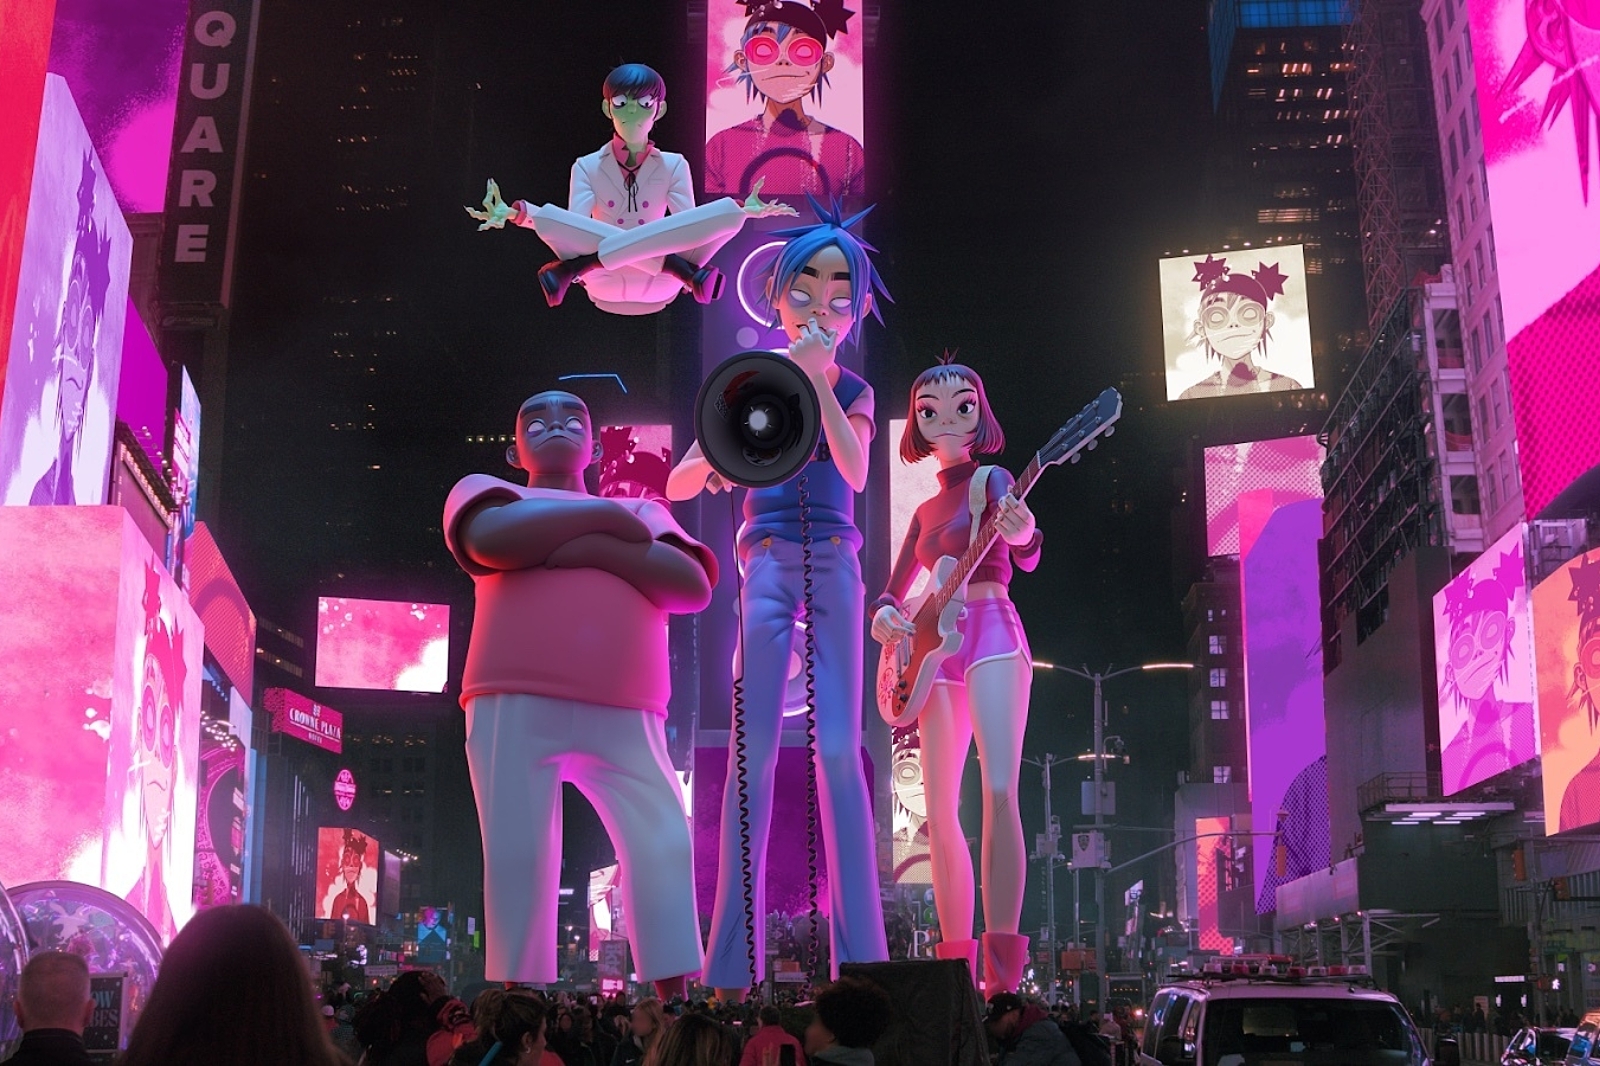 Gorillaz will perform new track 'Skinny Ape' in New York's Times Square and London's Piccadilly Circus this month